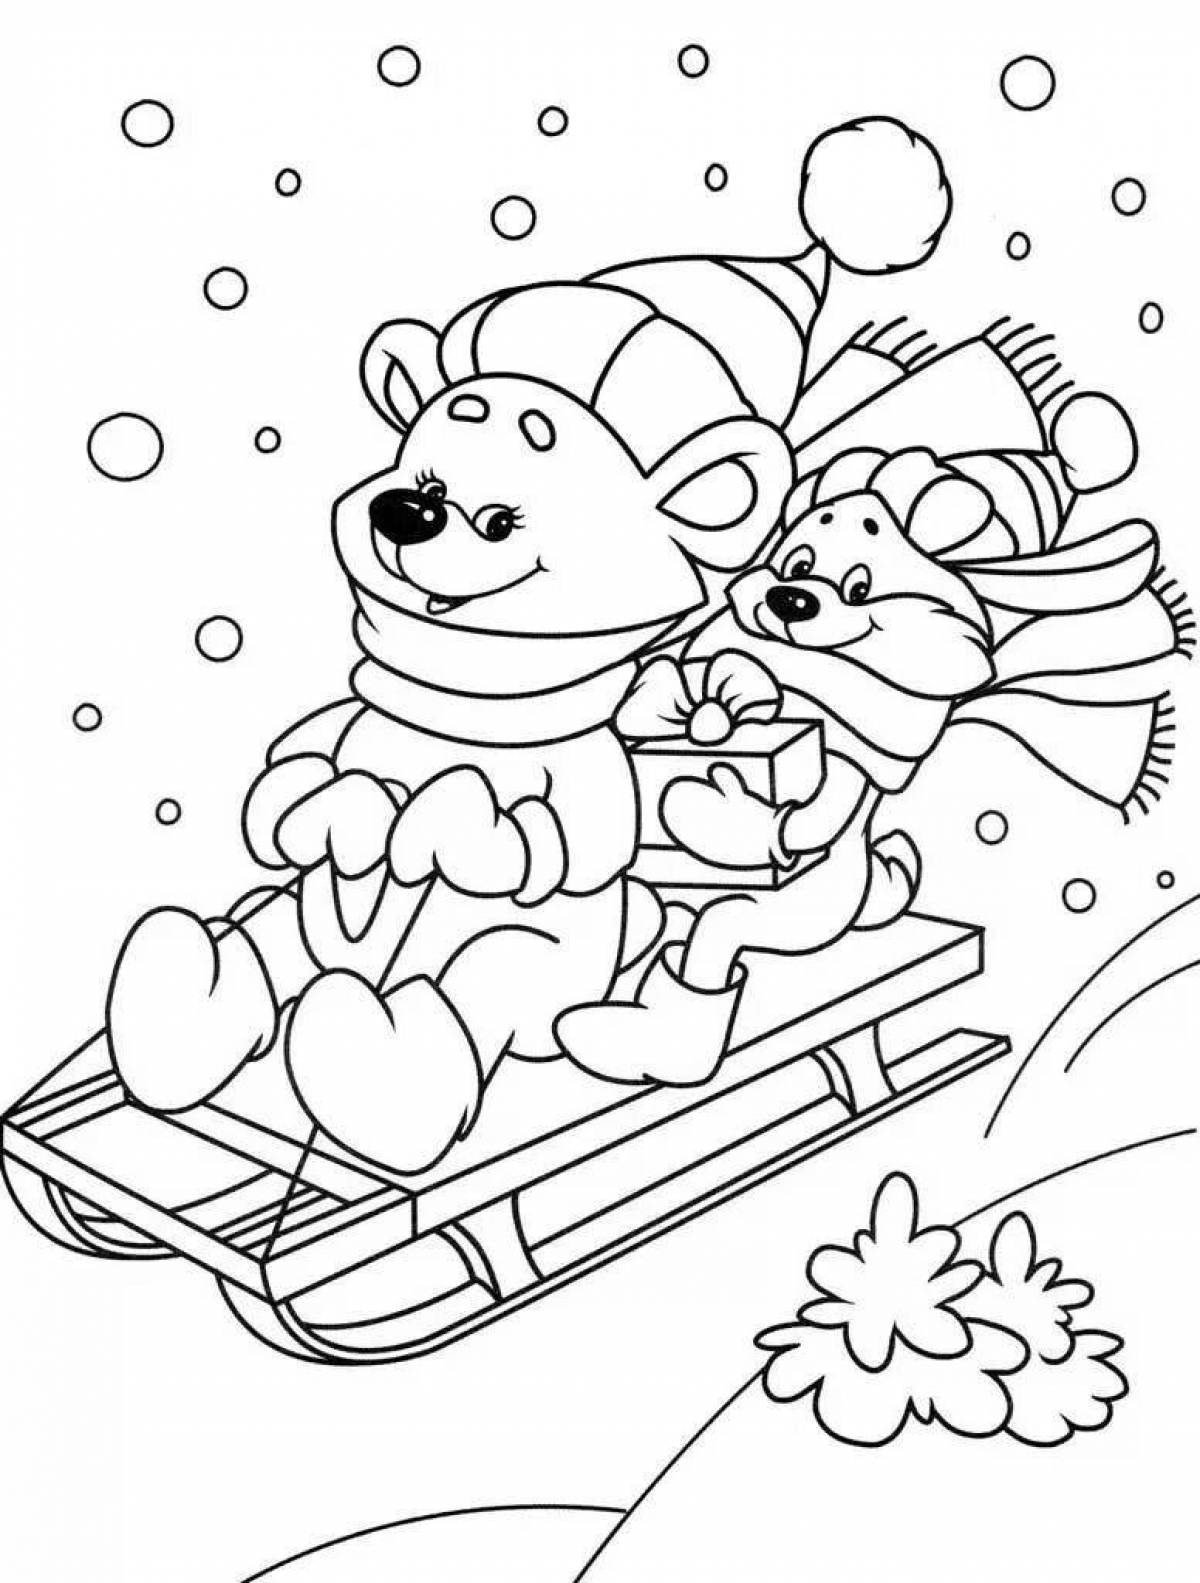 Whimsical winter coloring book for 8 year olds